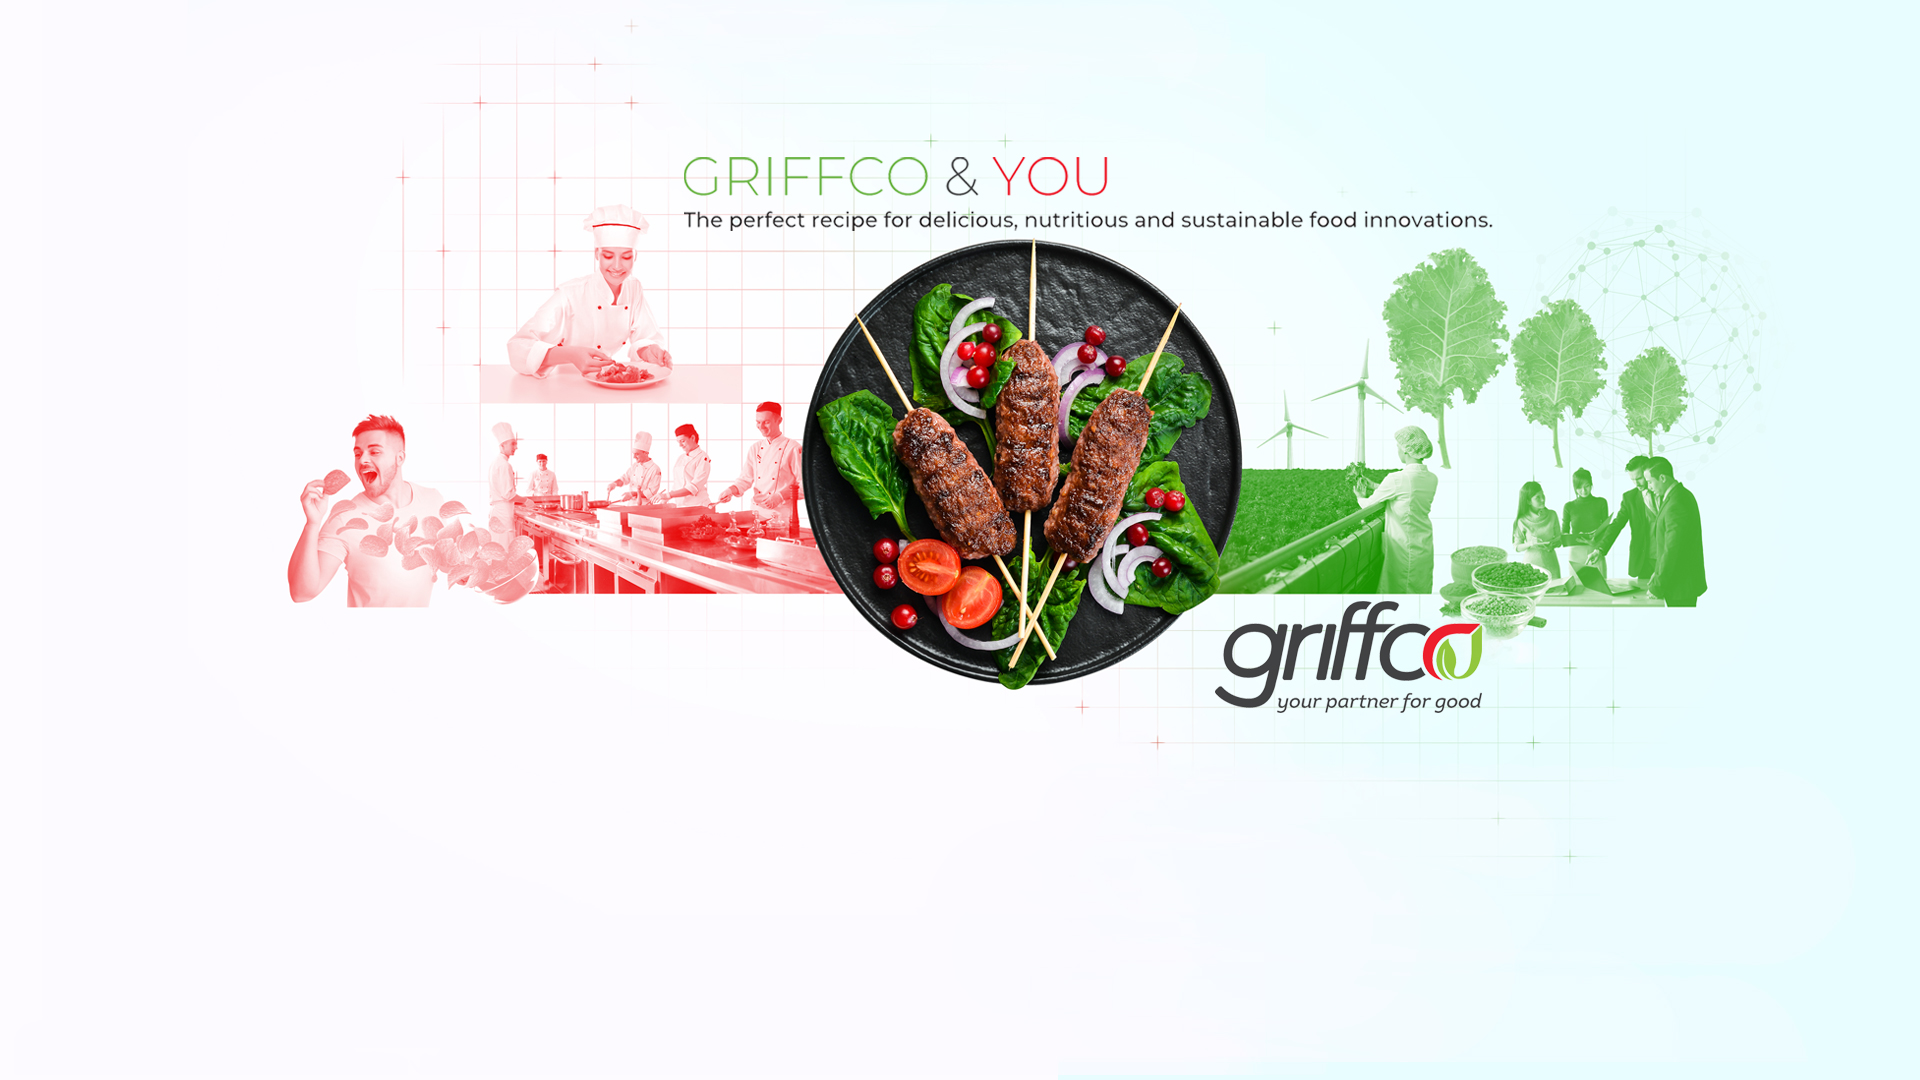 GRIFFCO BRINGS WORLD-CLASS PRODUCTS AND SERVICES TO GCC CUSTOMERS